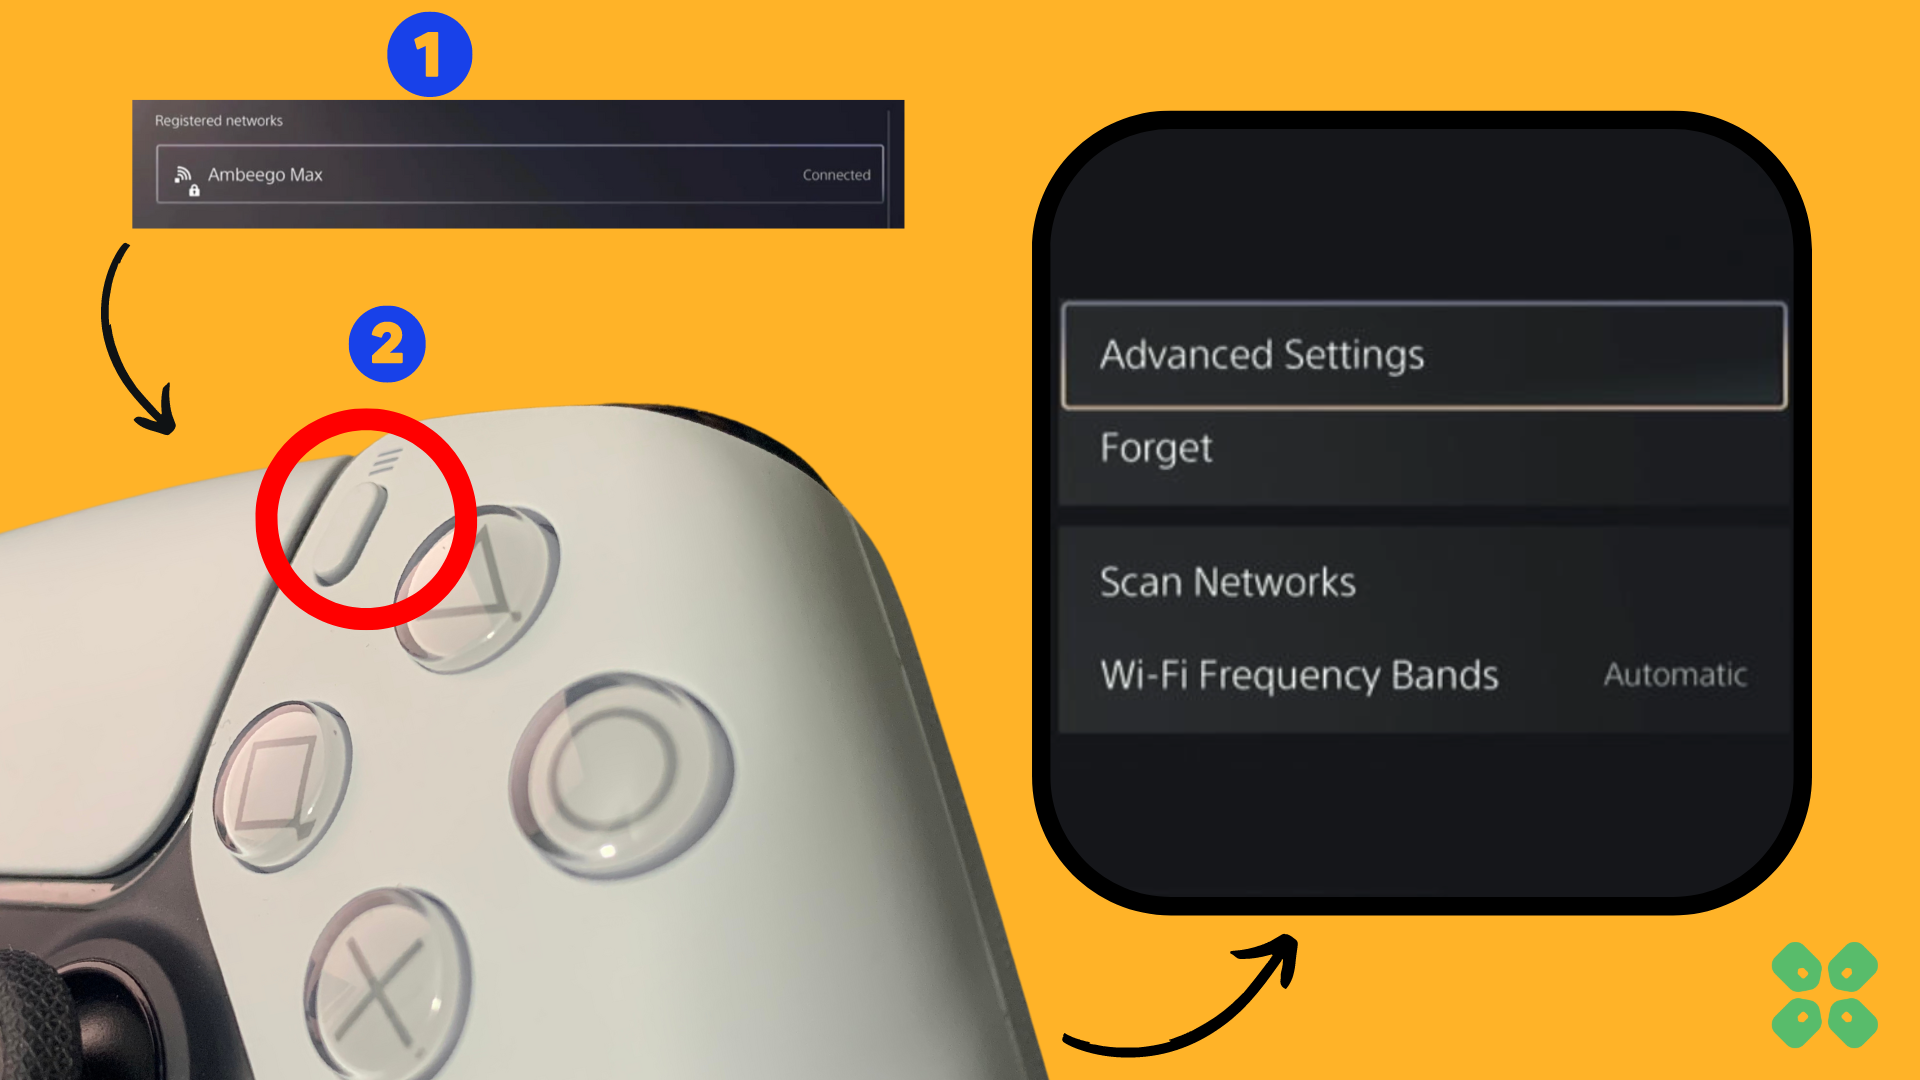 press the options button on the Connected Network